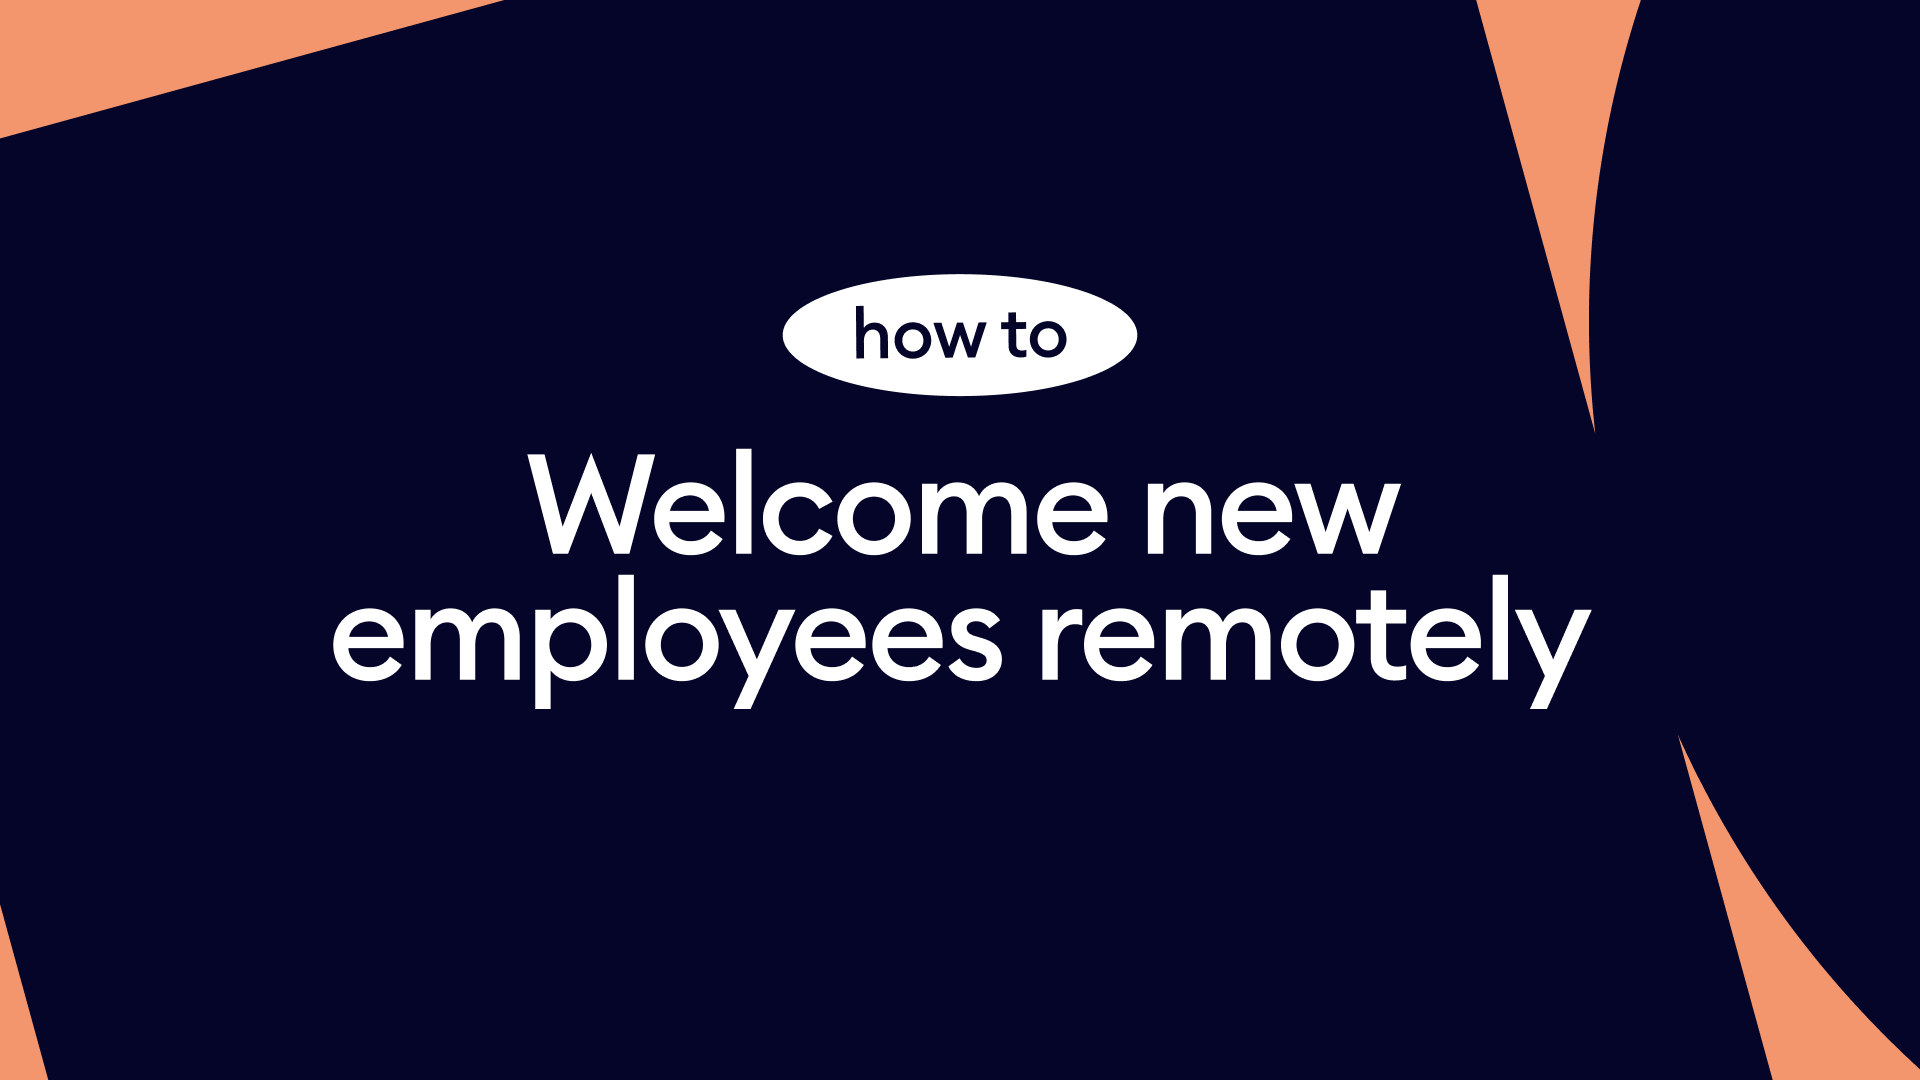 How to welcome new employees remotely